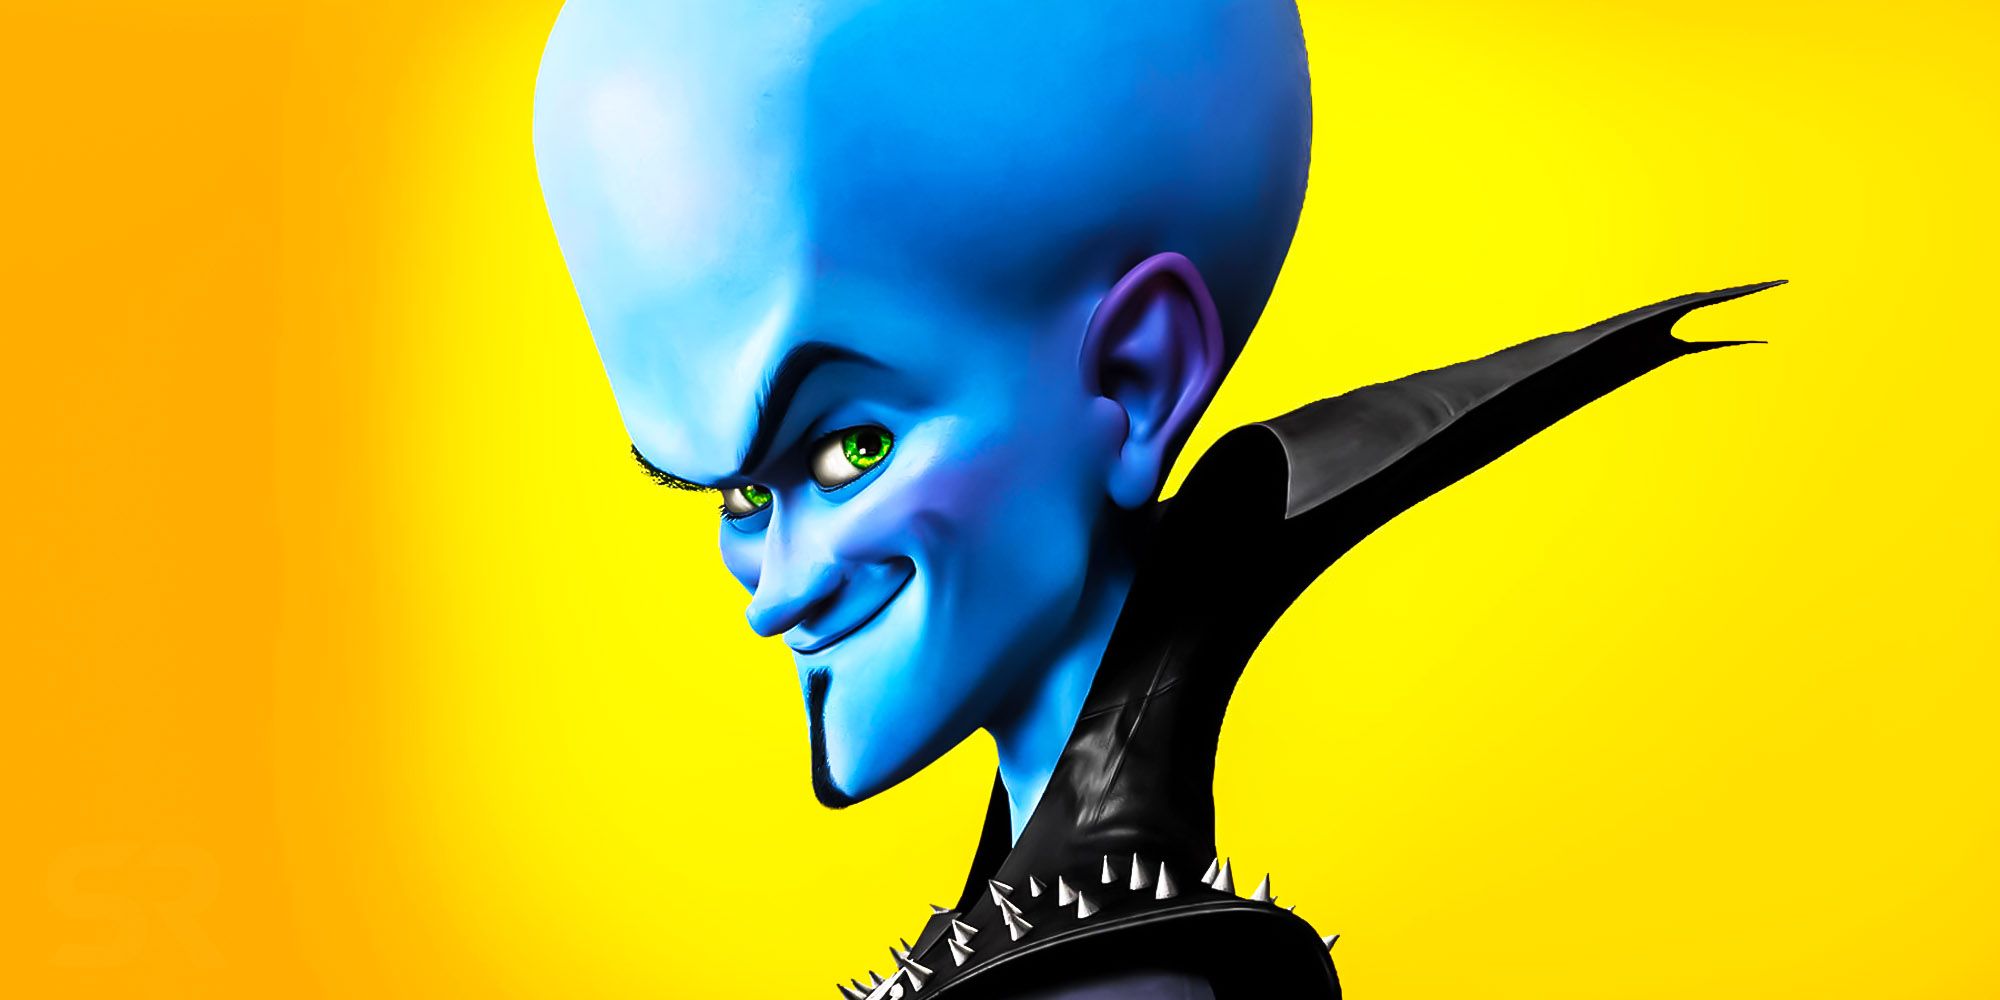 DreamPlay - Catch Megamind at DreamPlay this whole month of August!  Purchase DreamPlay's Movie Package for only P1,000 and watch Megamind in 4D  at DreamTheatre with this exclusive offer: - DreamPlay ALL-DAY